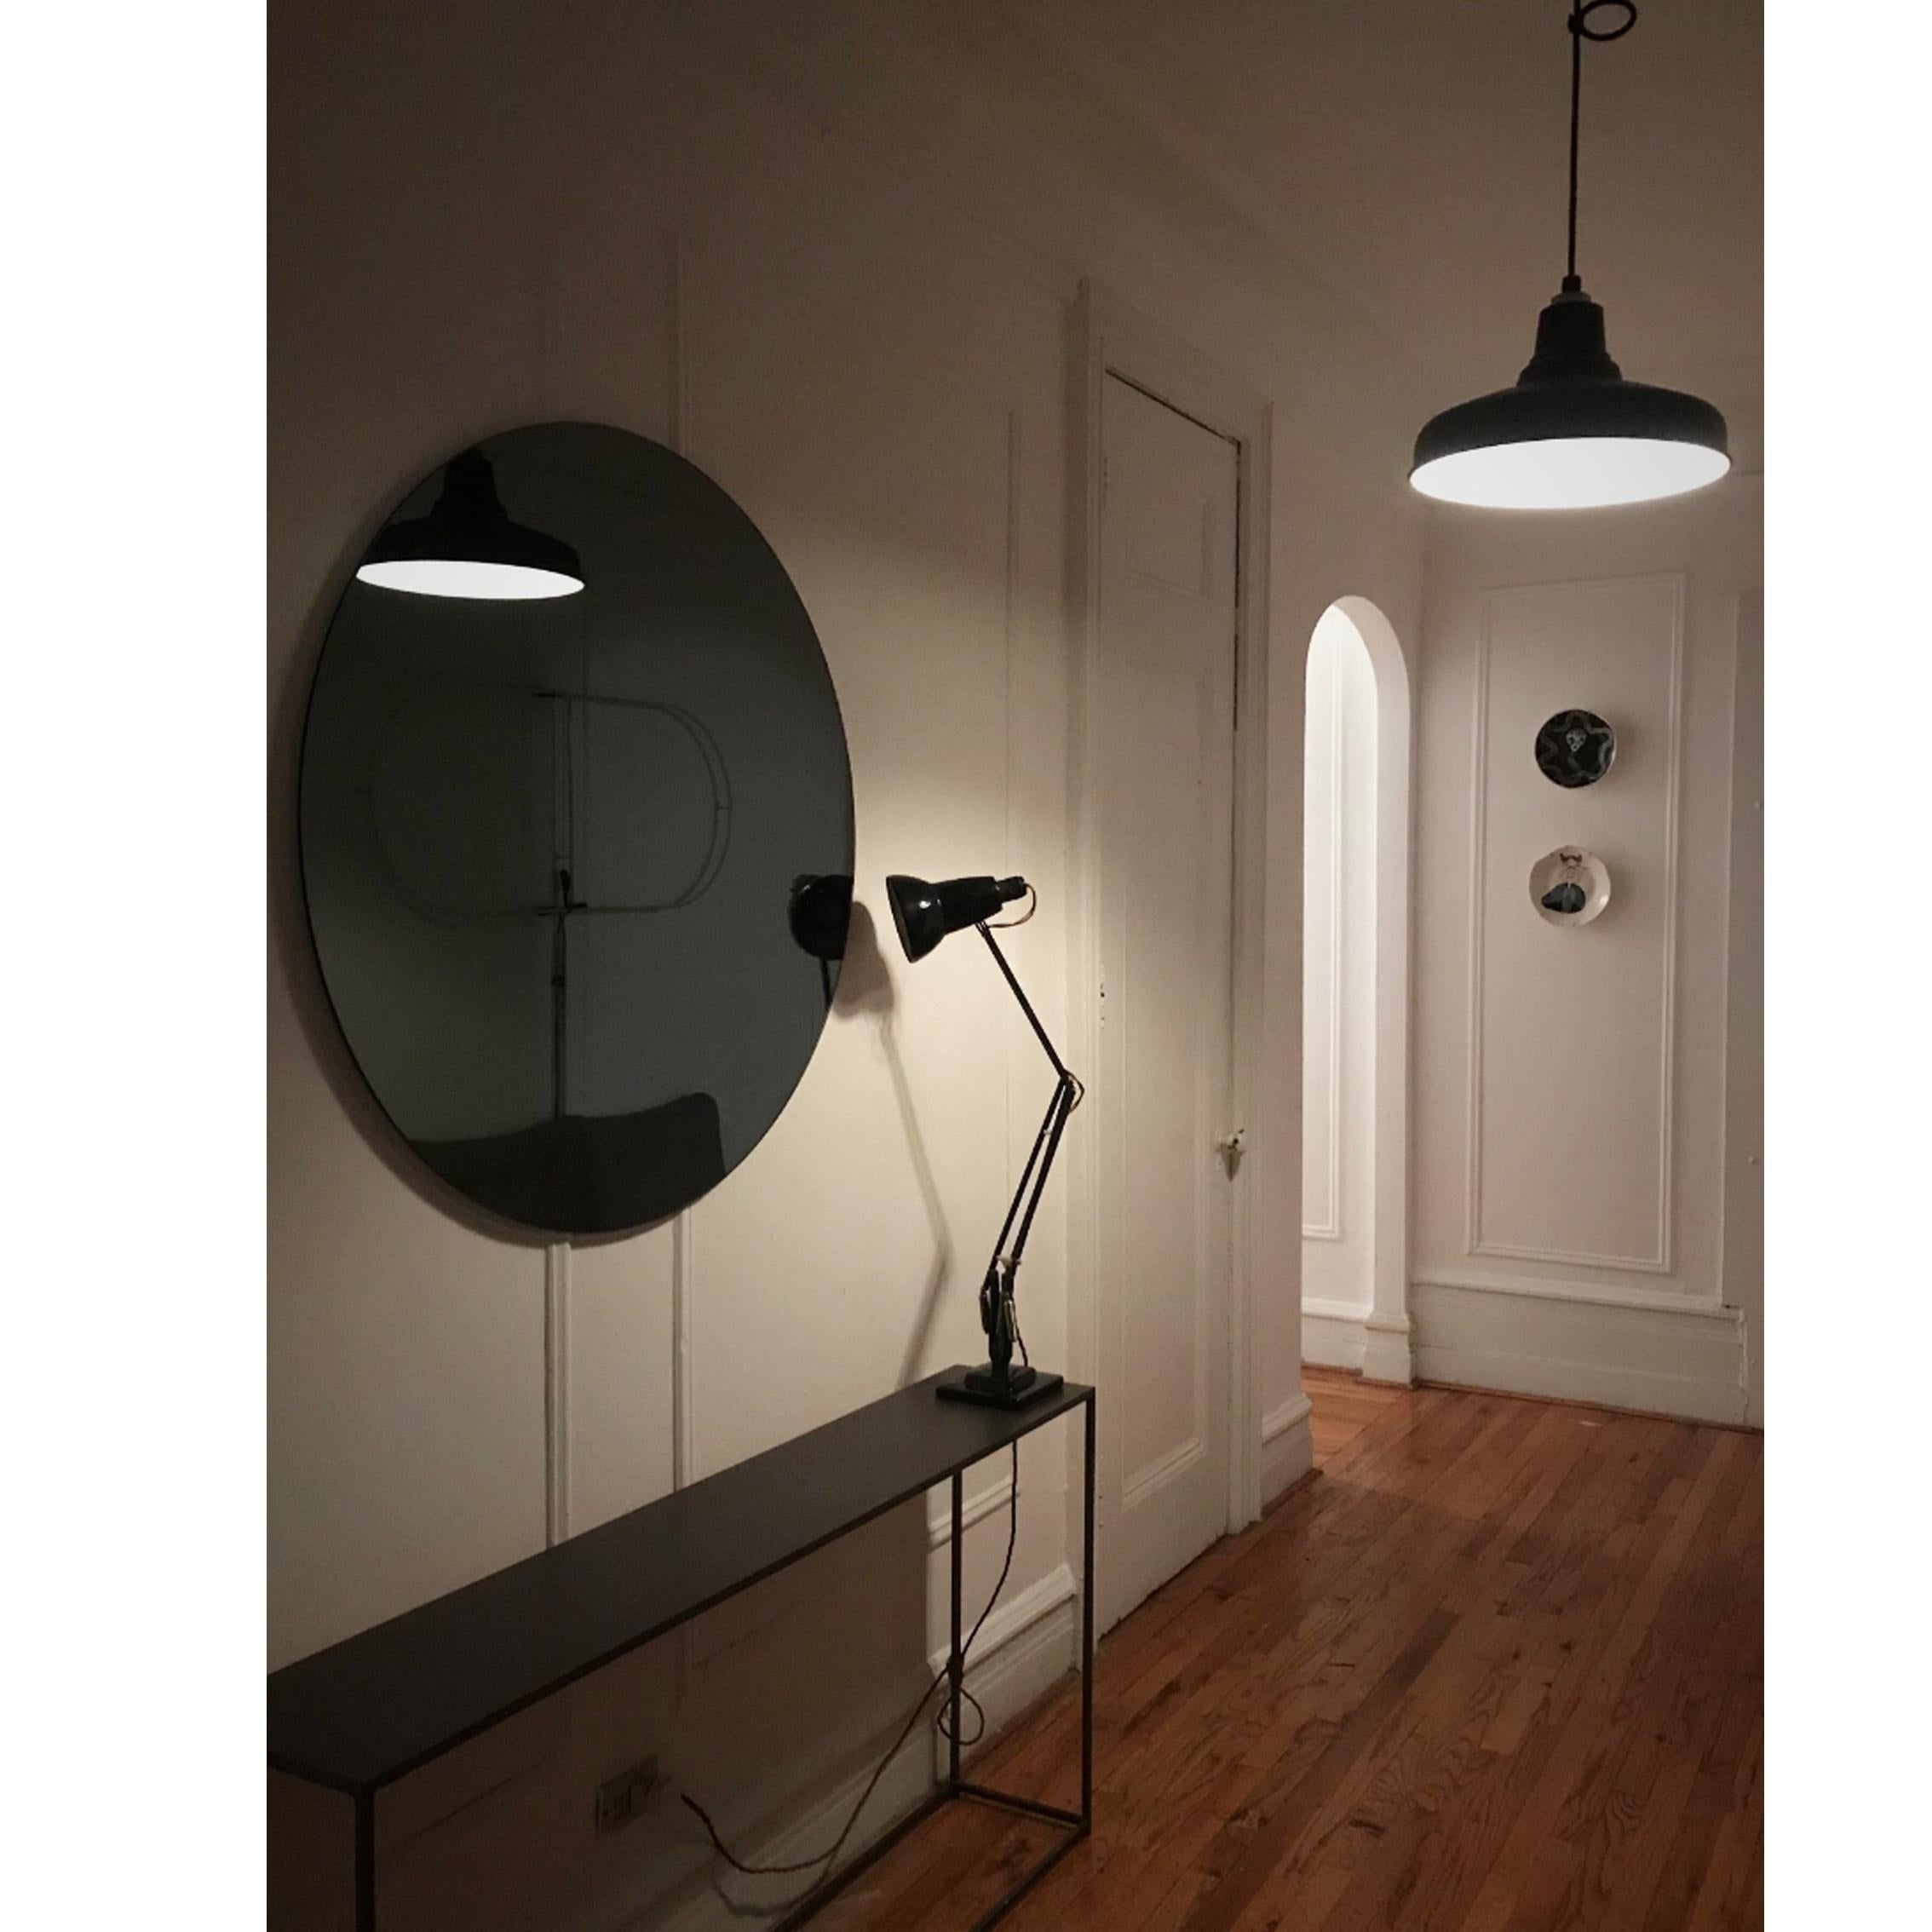 Orbis Black Tinted Round Frameless Modern Mirror with Floating Effect, Medium In New Condition For Sale In London, GB